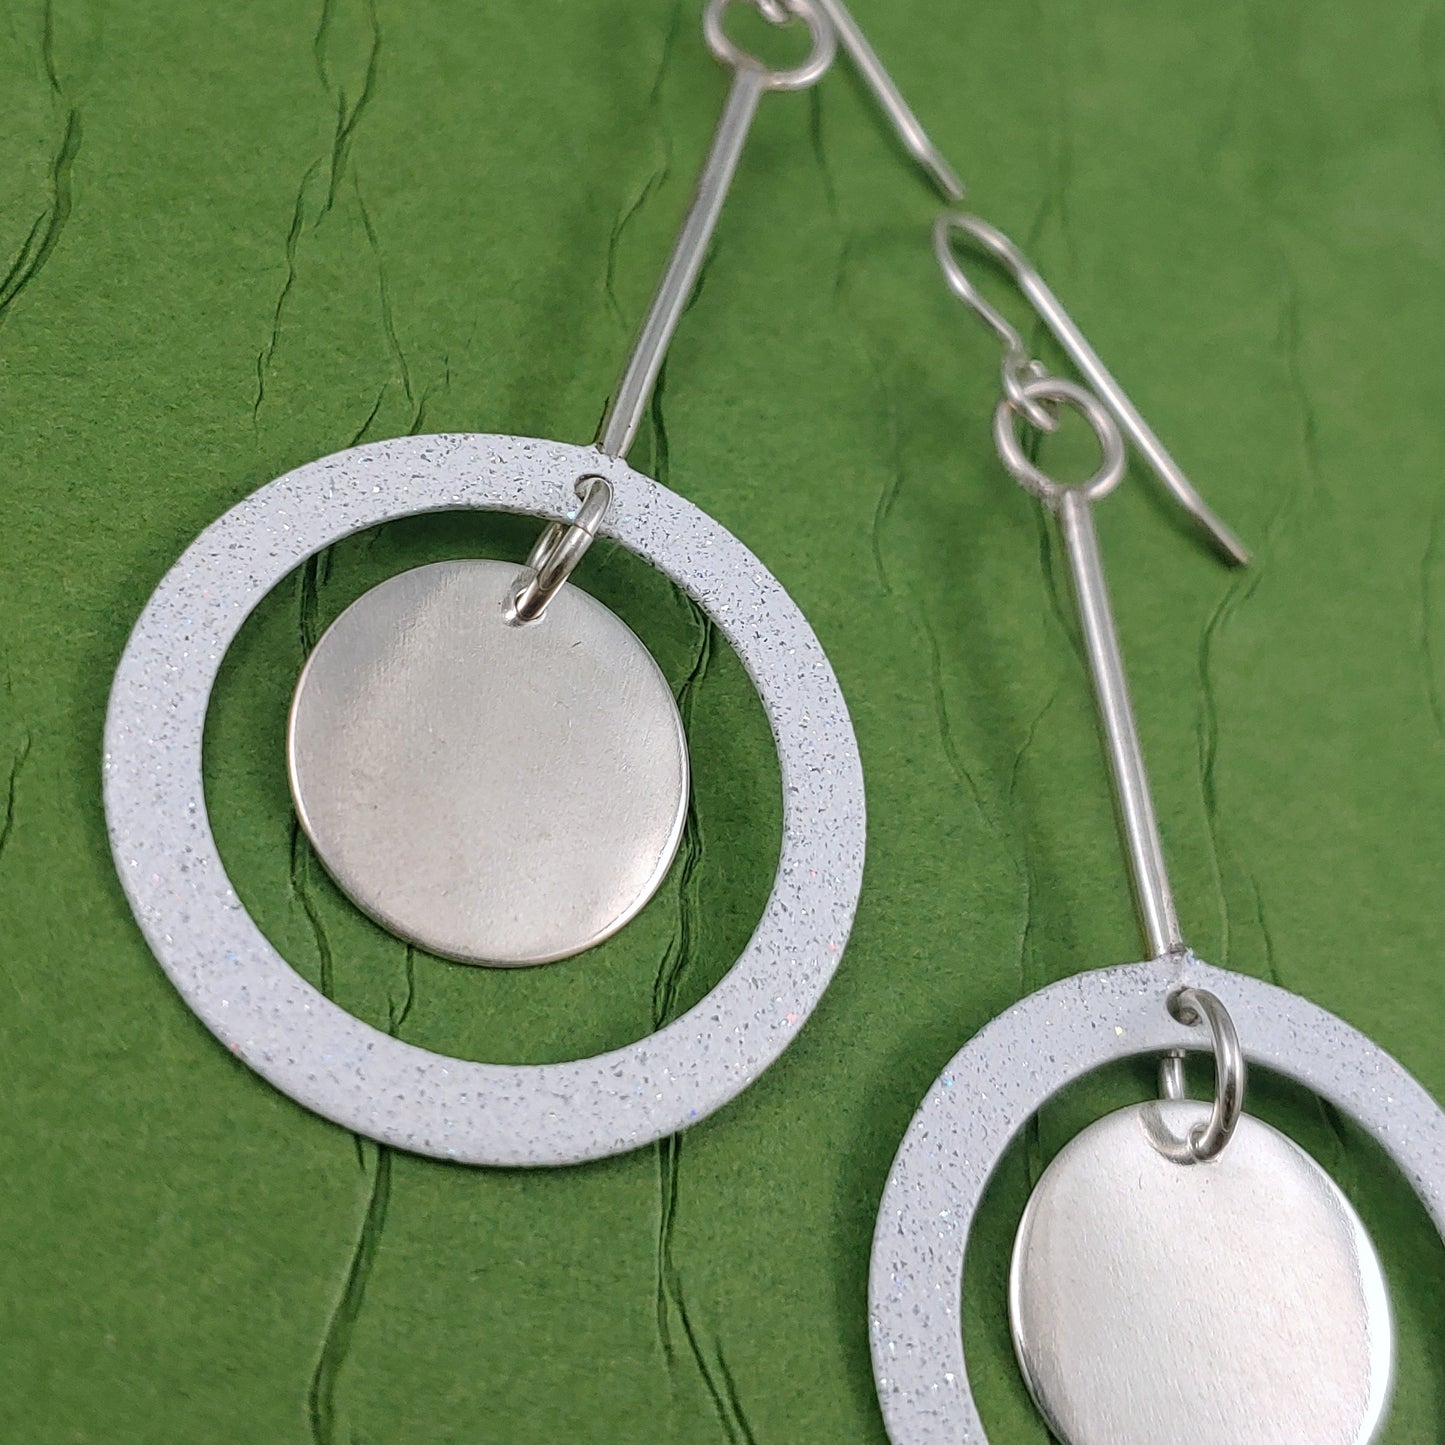 The Double Round Earrings - White and Silver